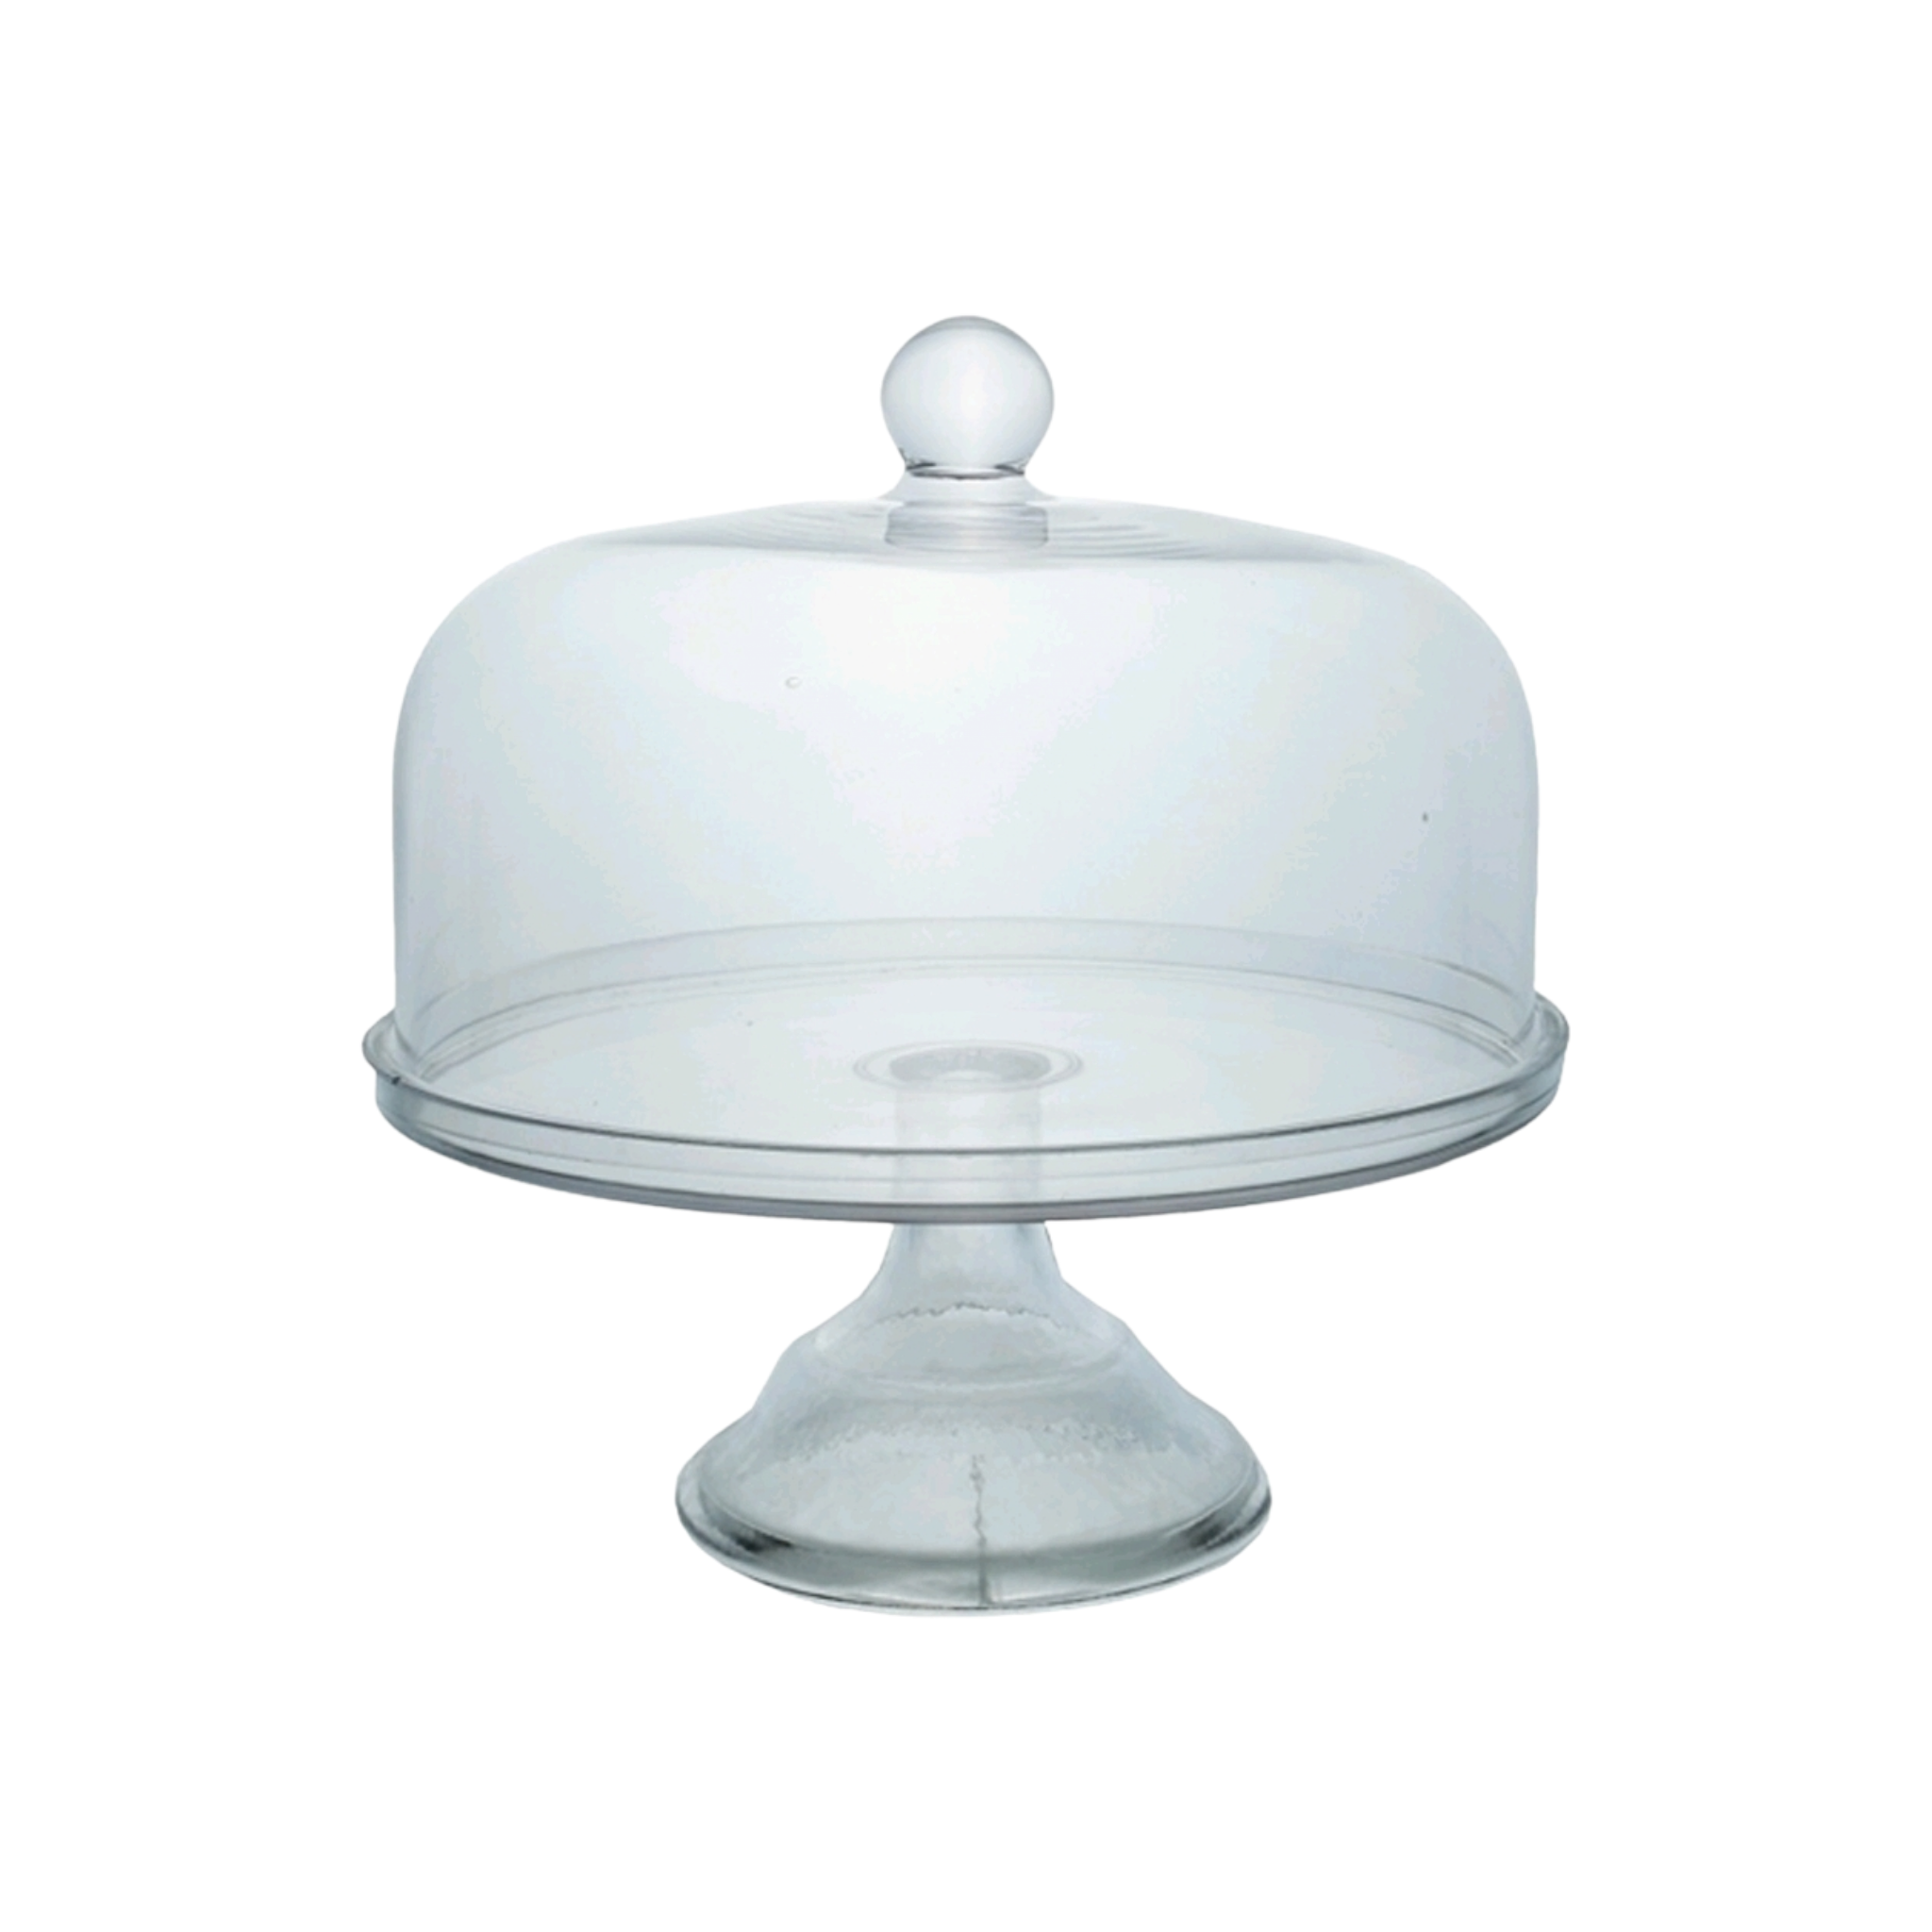 Pasabahce Glass Cake Dome Footed 26x26cm 34535